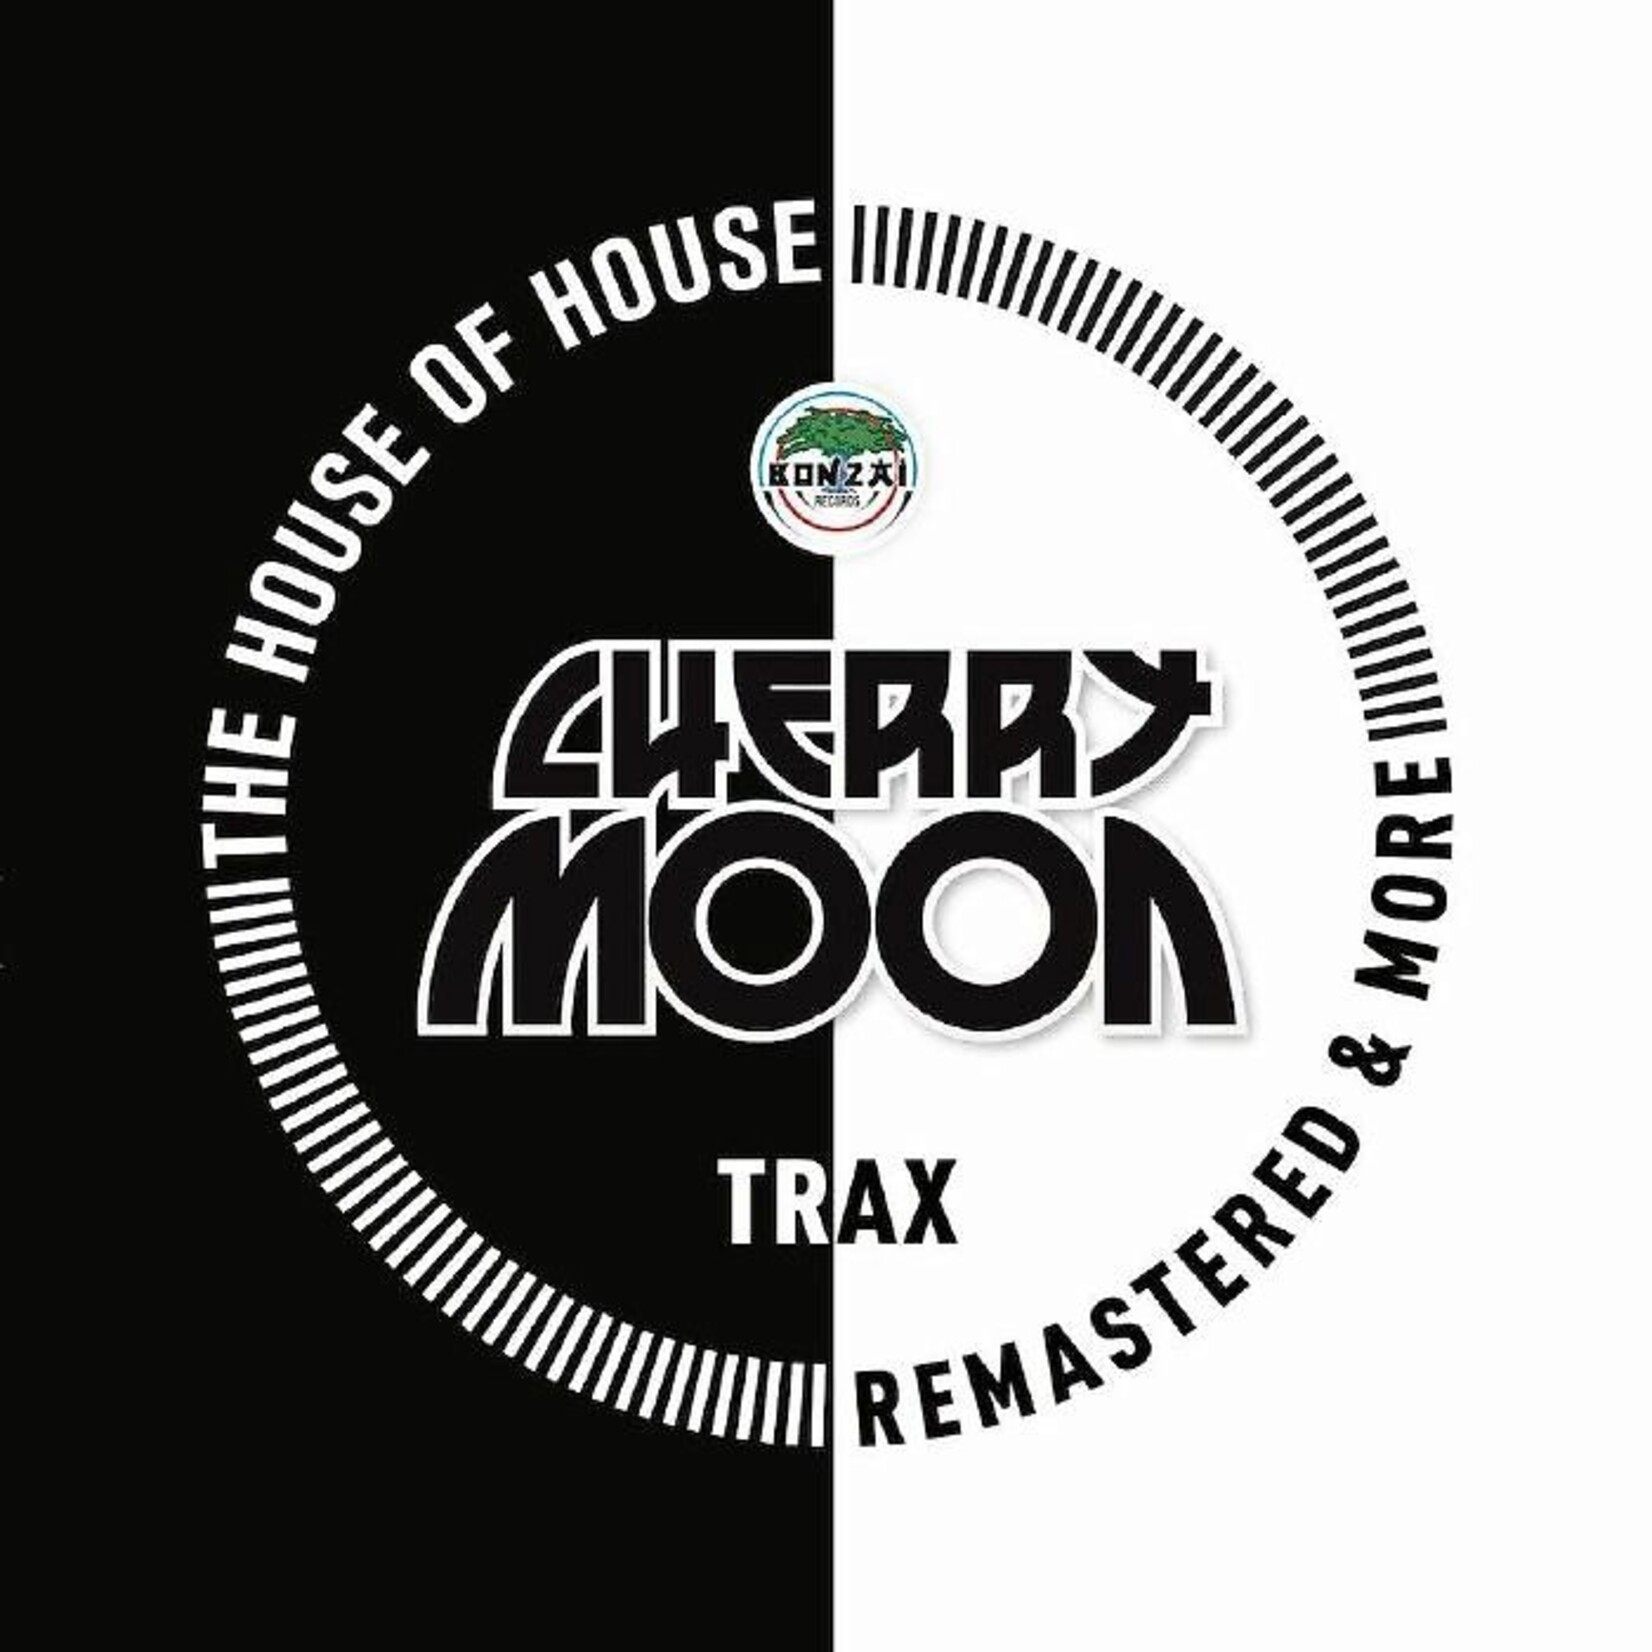 Cherry Moon Trax – The House of House (Remastered & More)